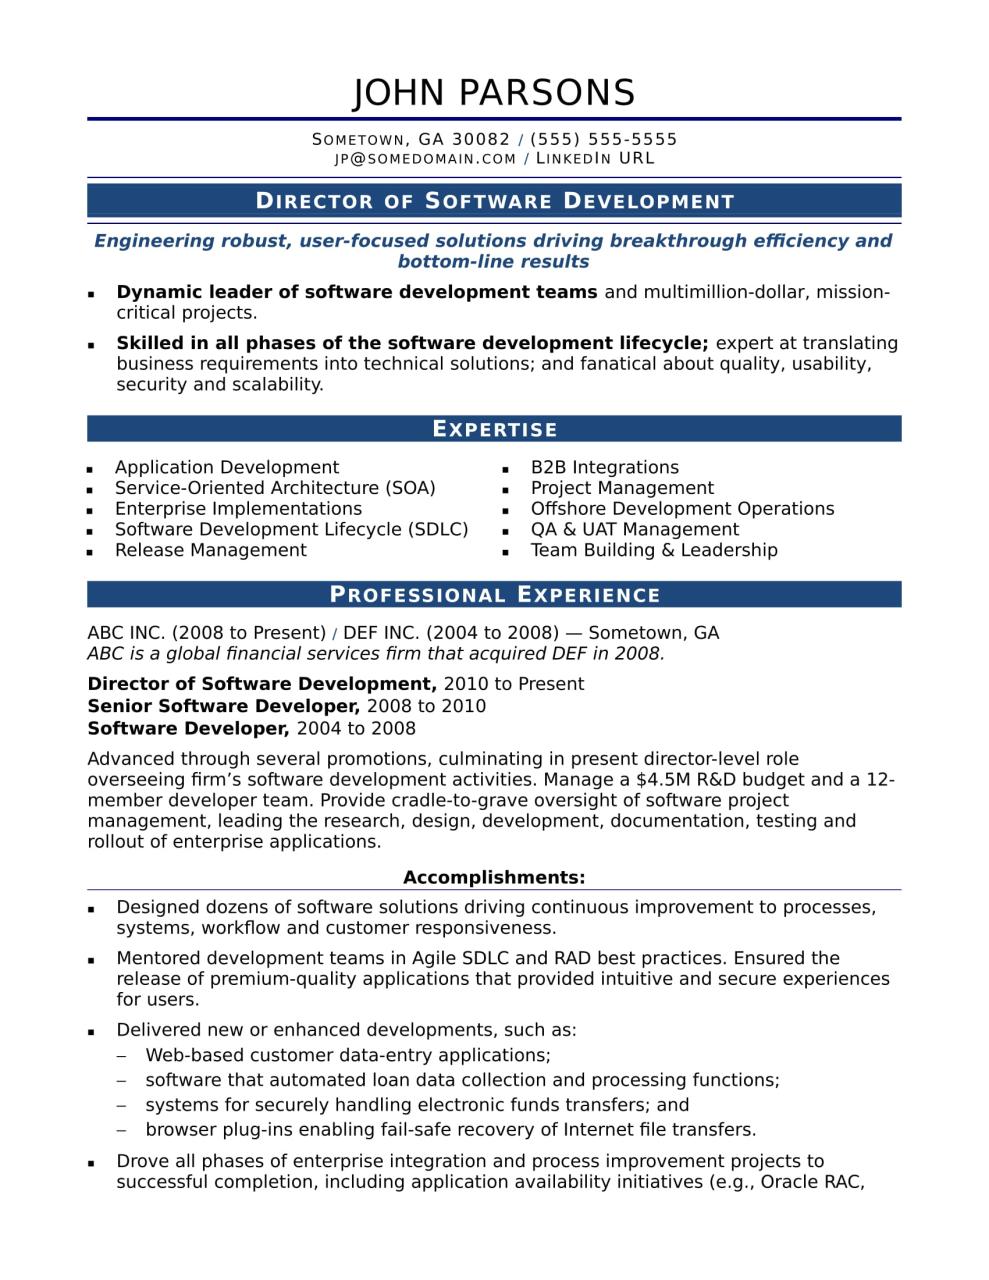 Sample Resume for an Experienced IT Developer